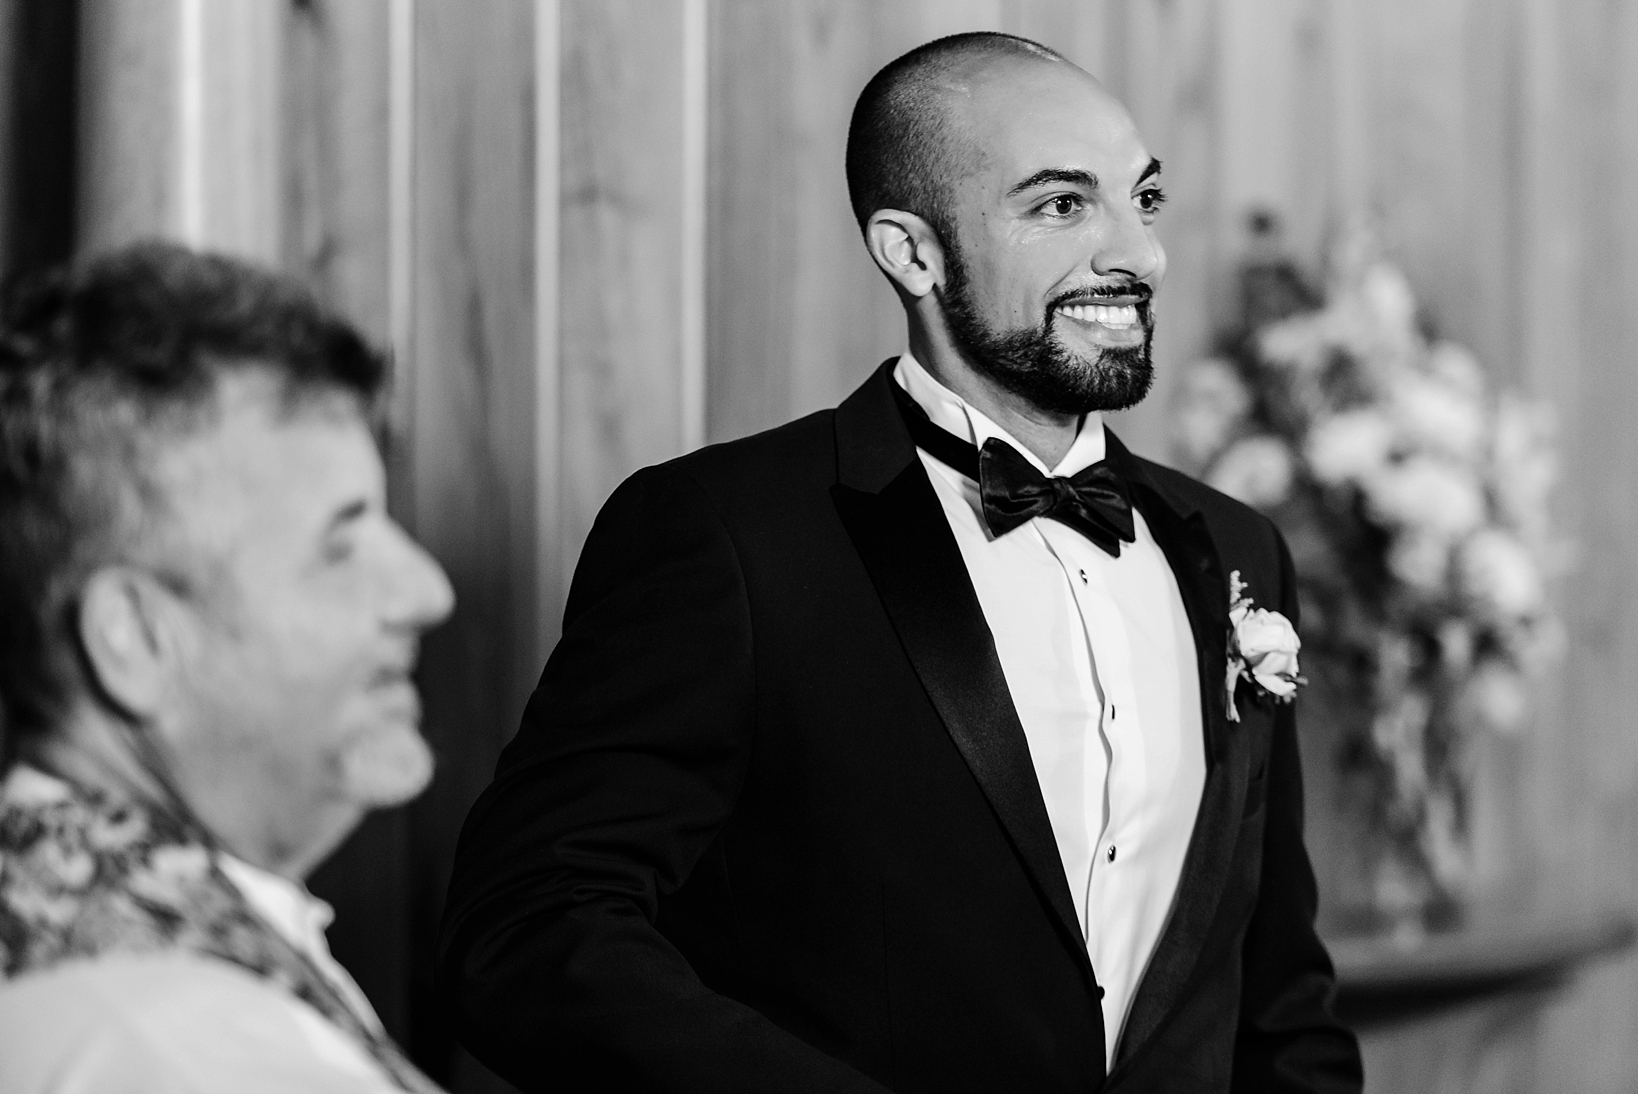 Groom smiling as he sees his bride for the first time walking down the aisle by Sarah & Ben Photography